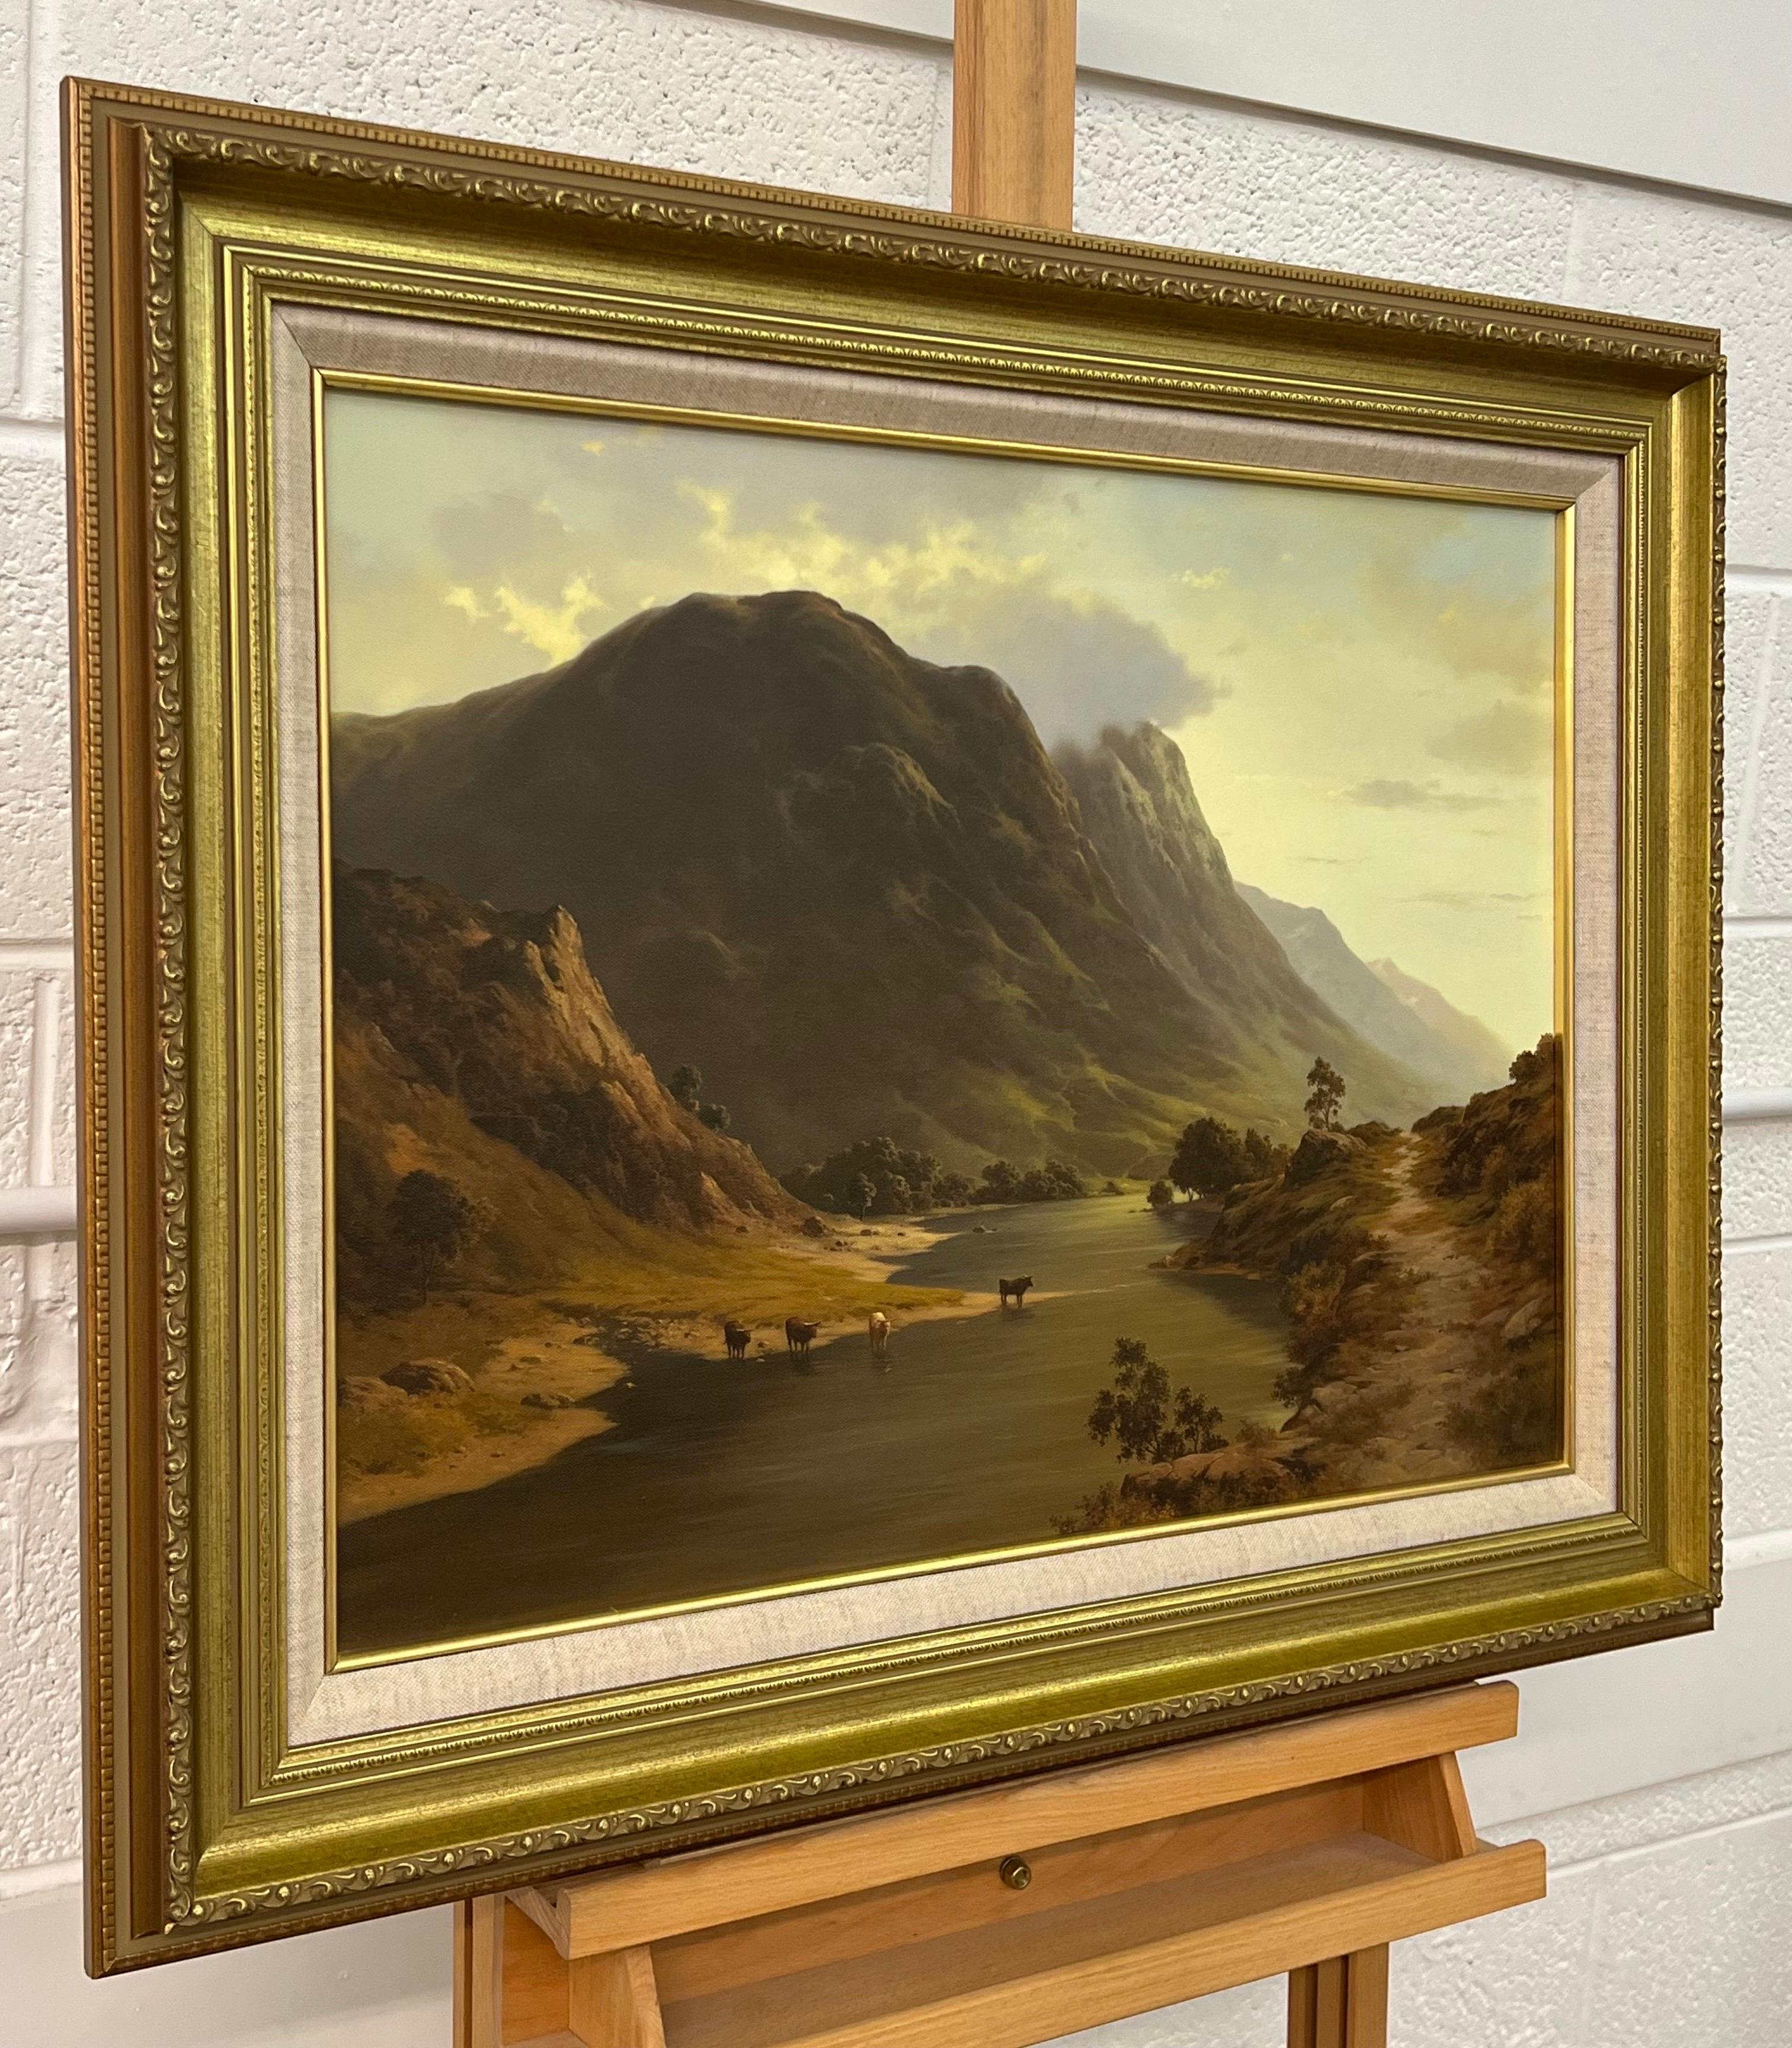 Cattle drinking water from a Loch in the Mountains of the Scottish Highlands - Painting by Howard Shingler